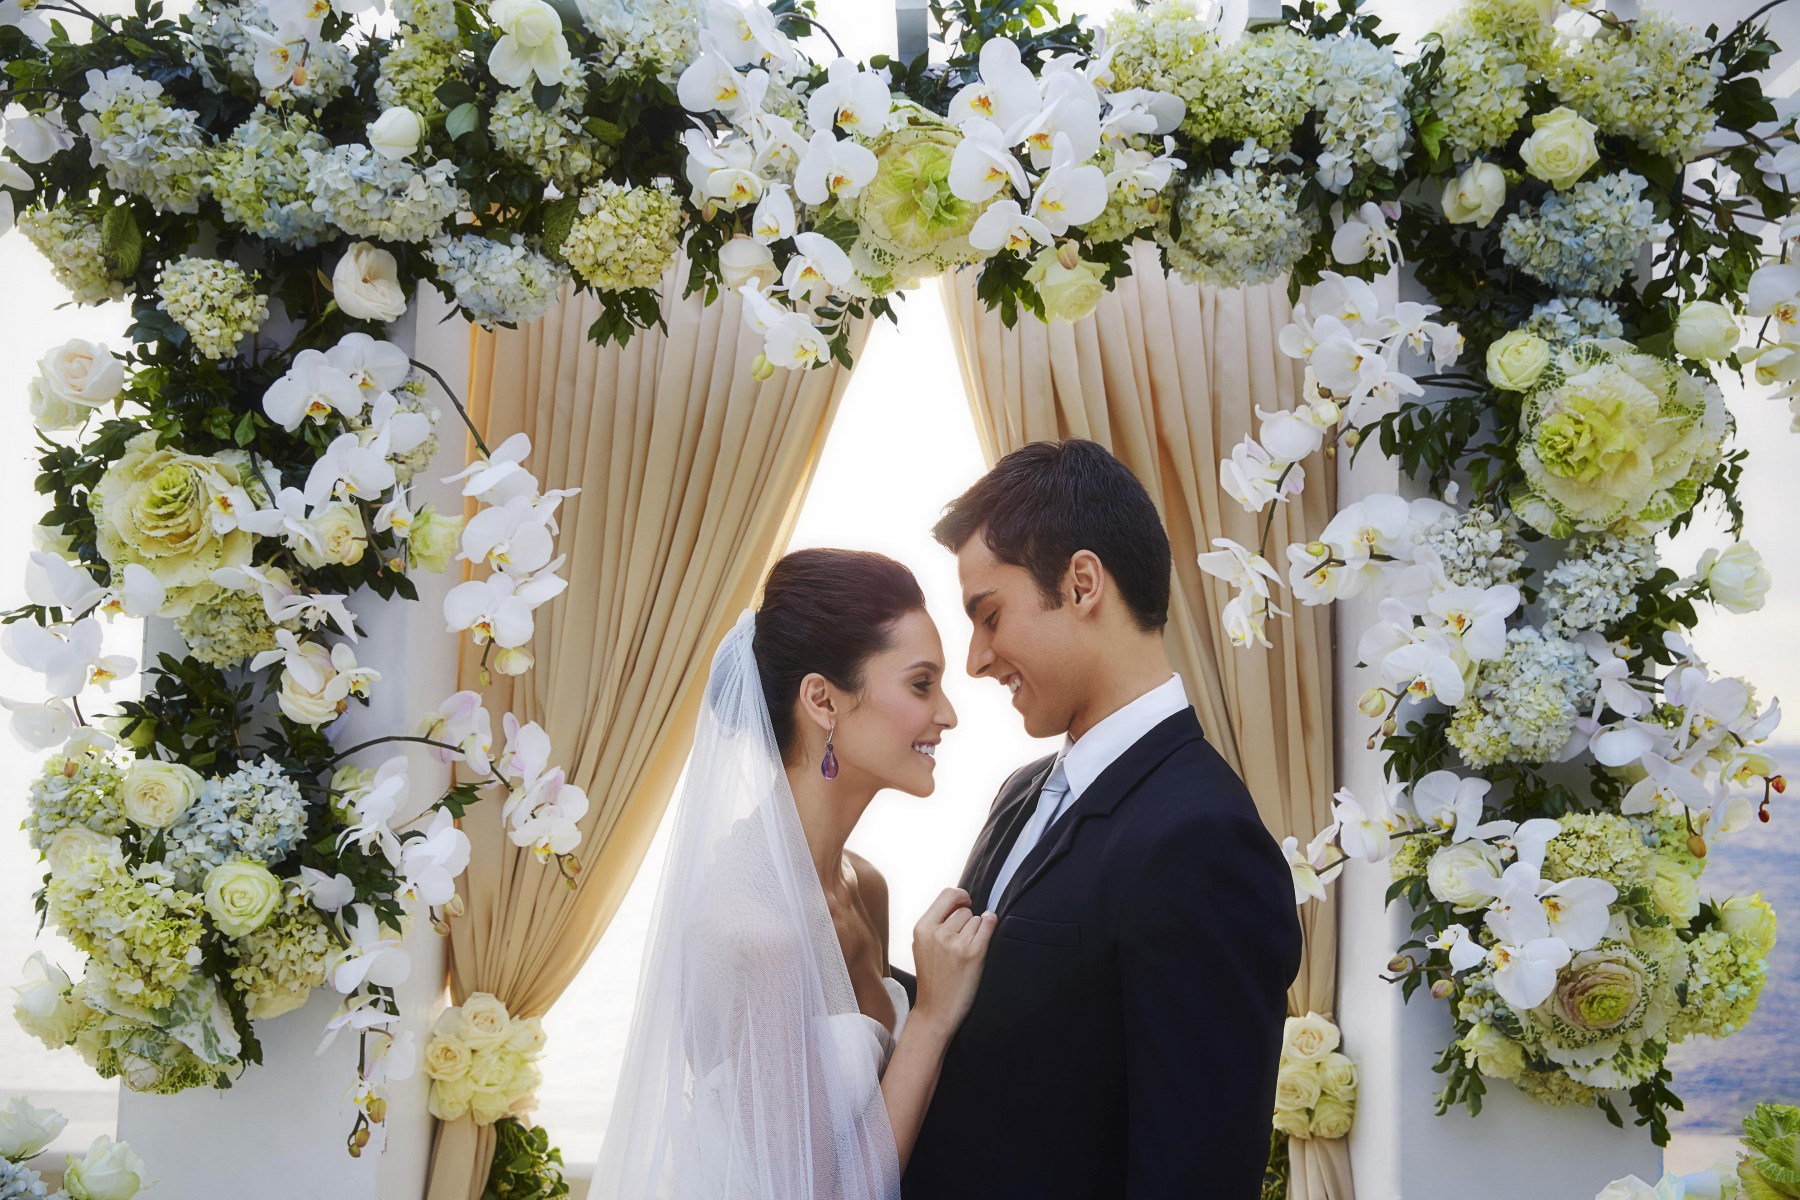 celebrate your wedding reception at the 5 star hotel in philippines - sofitel hotel